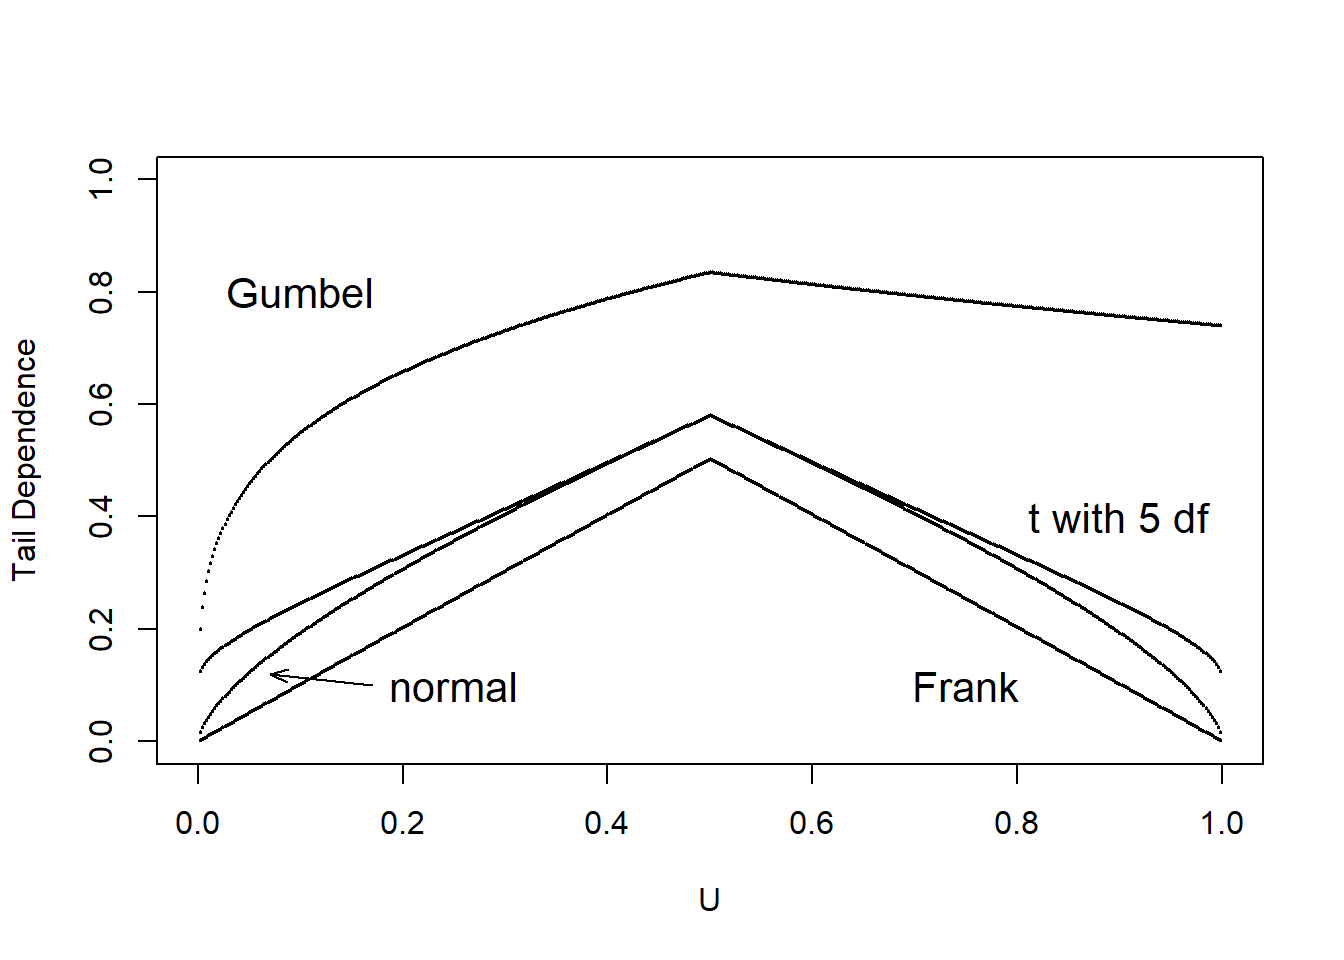 Tail Dependence Plots